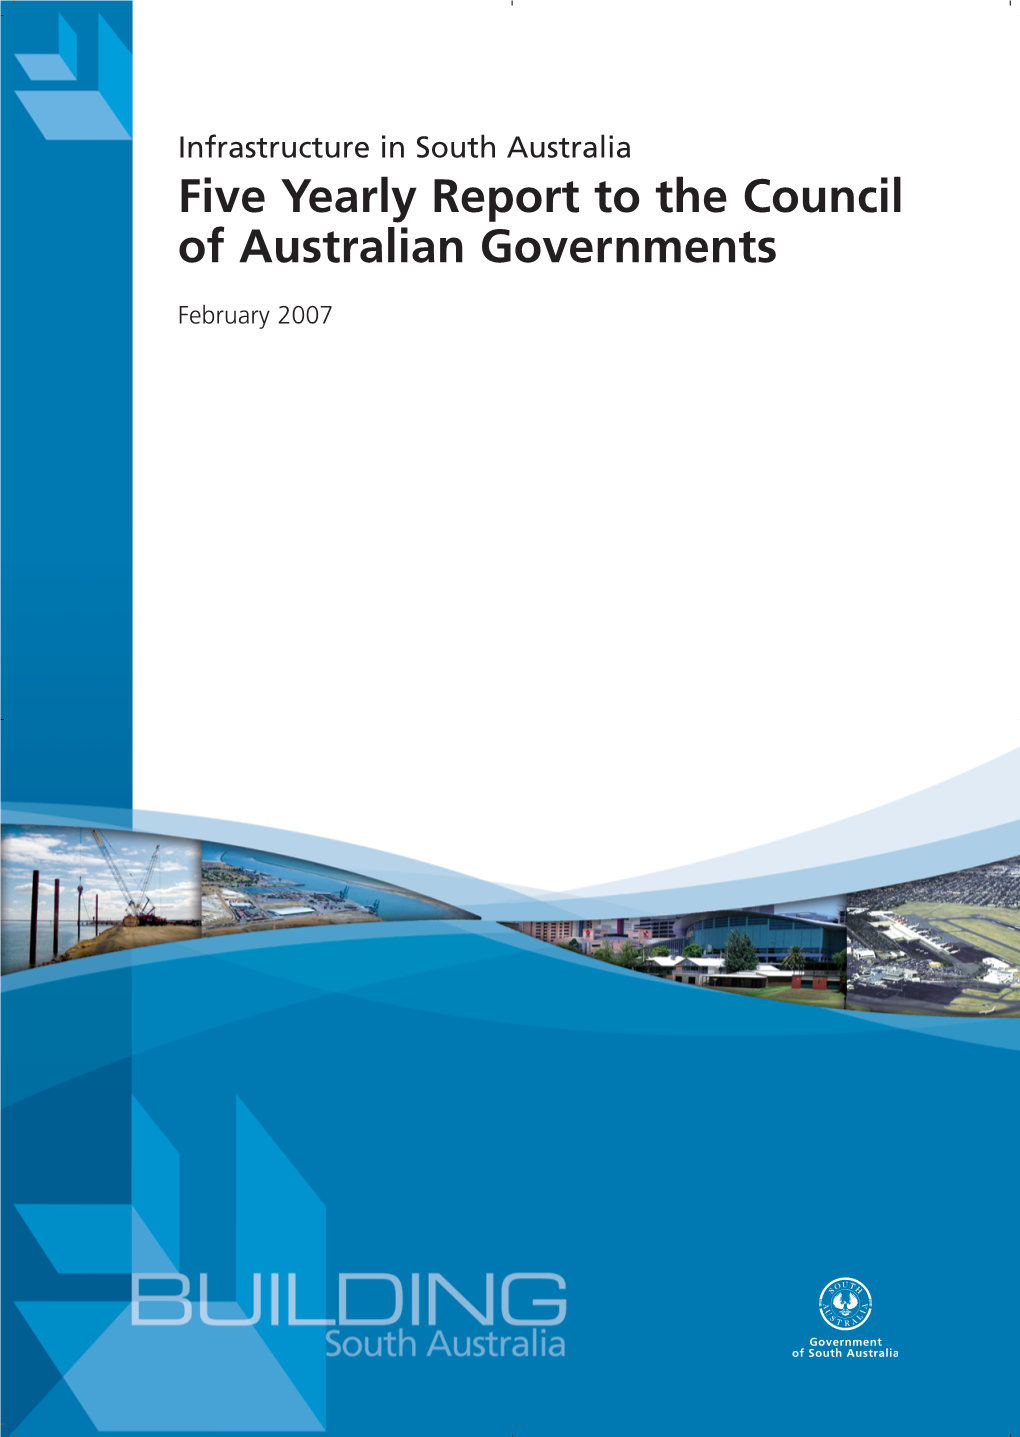 Five Yearly Report to the Council of Australian Governments